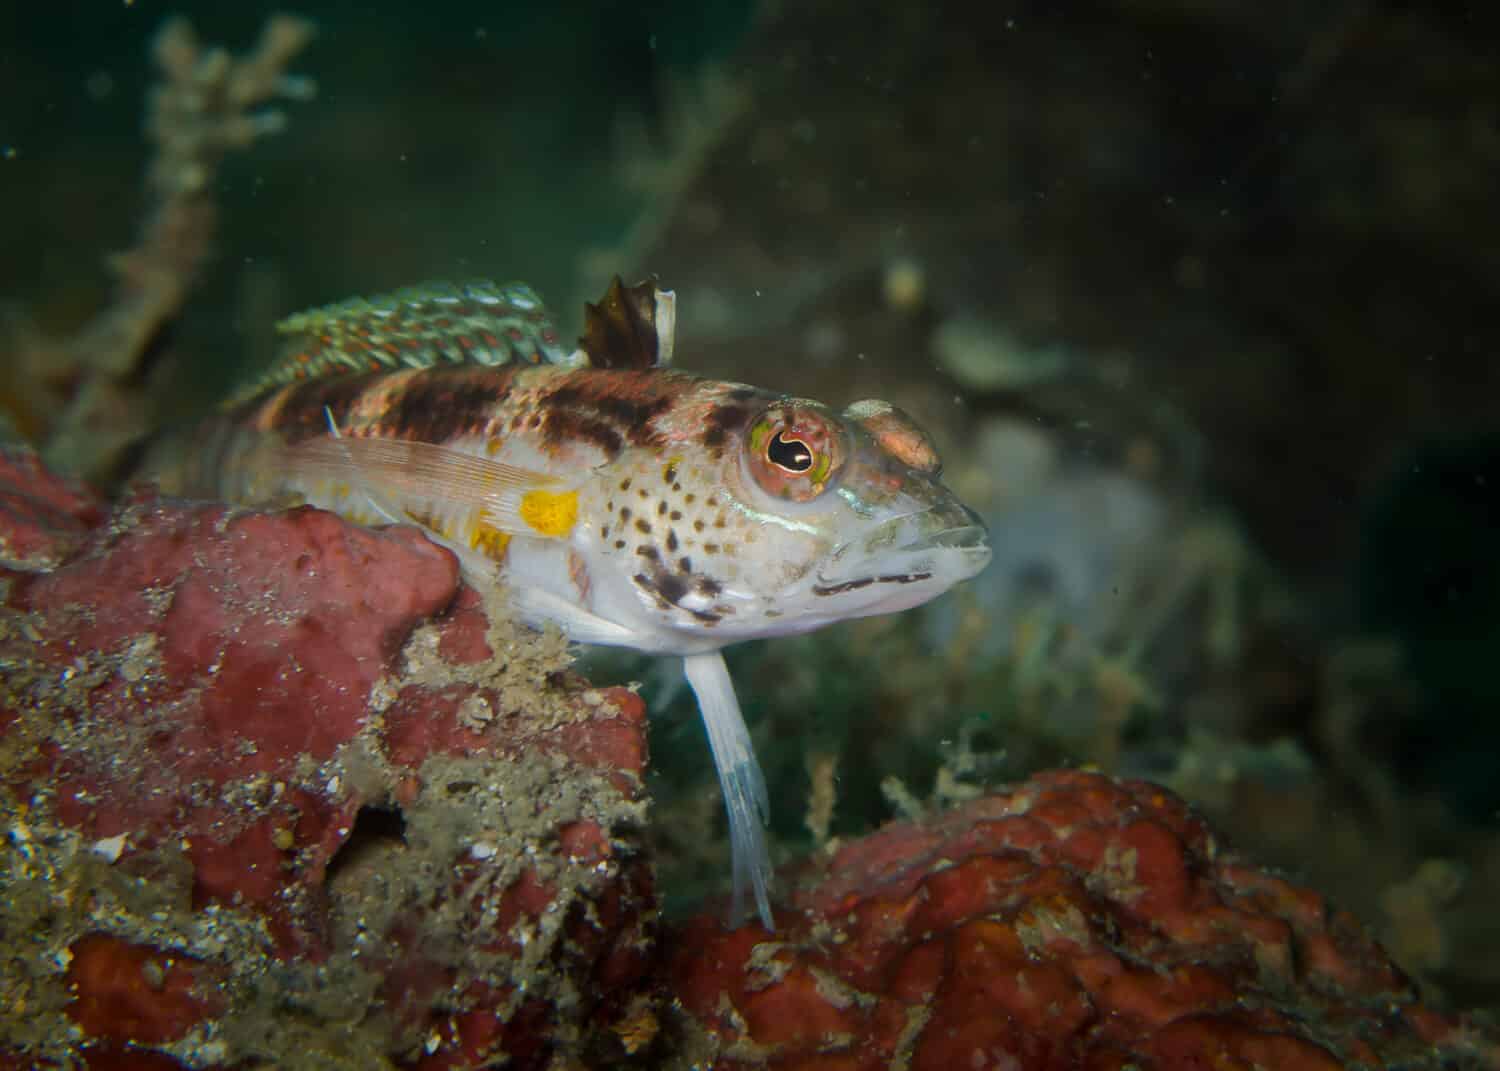 Snyder's Grubfish or Blackfin sandperch (Parapercis snyderi) in coralreef, Lembeh strait, North Sulawesi, Indonesia